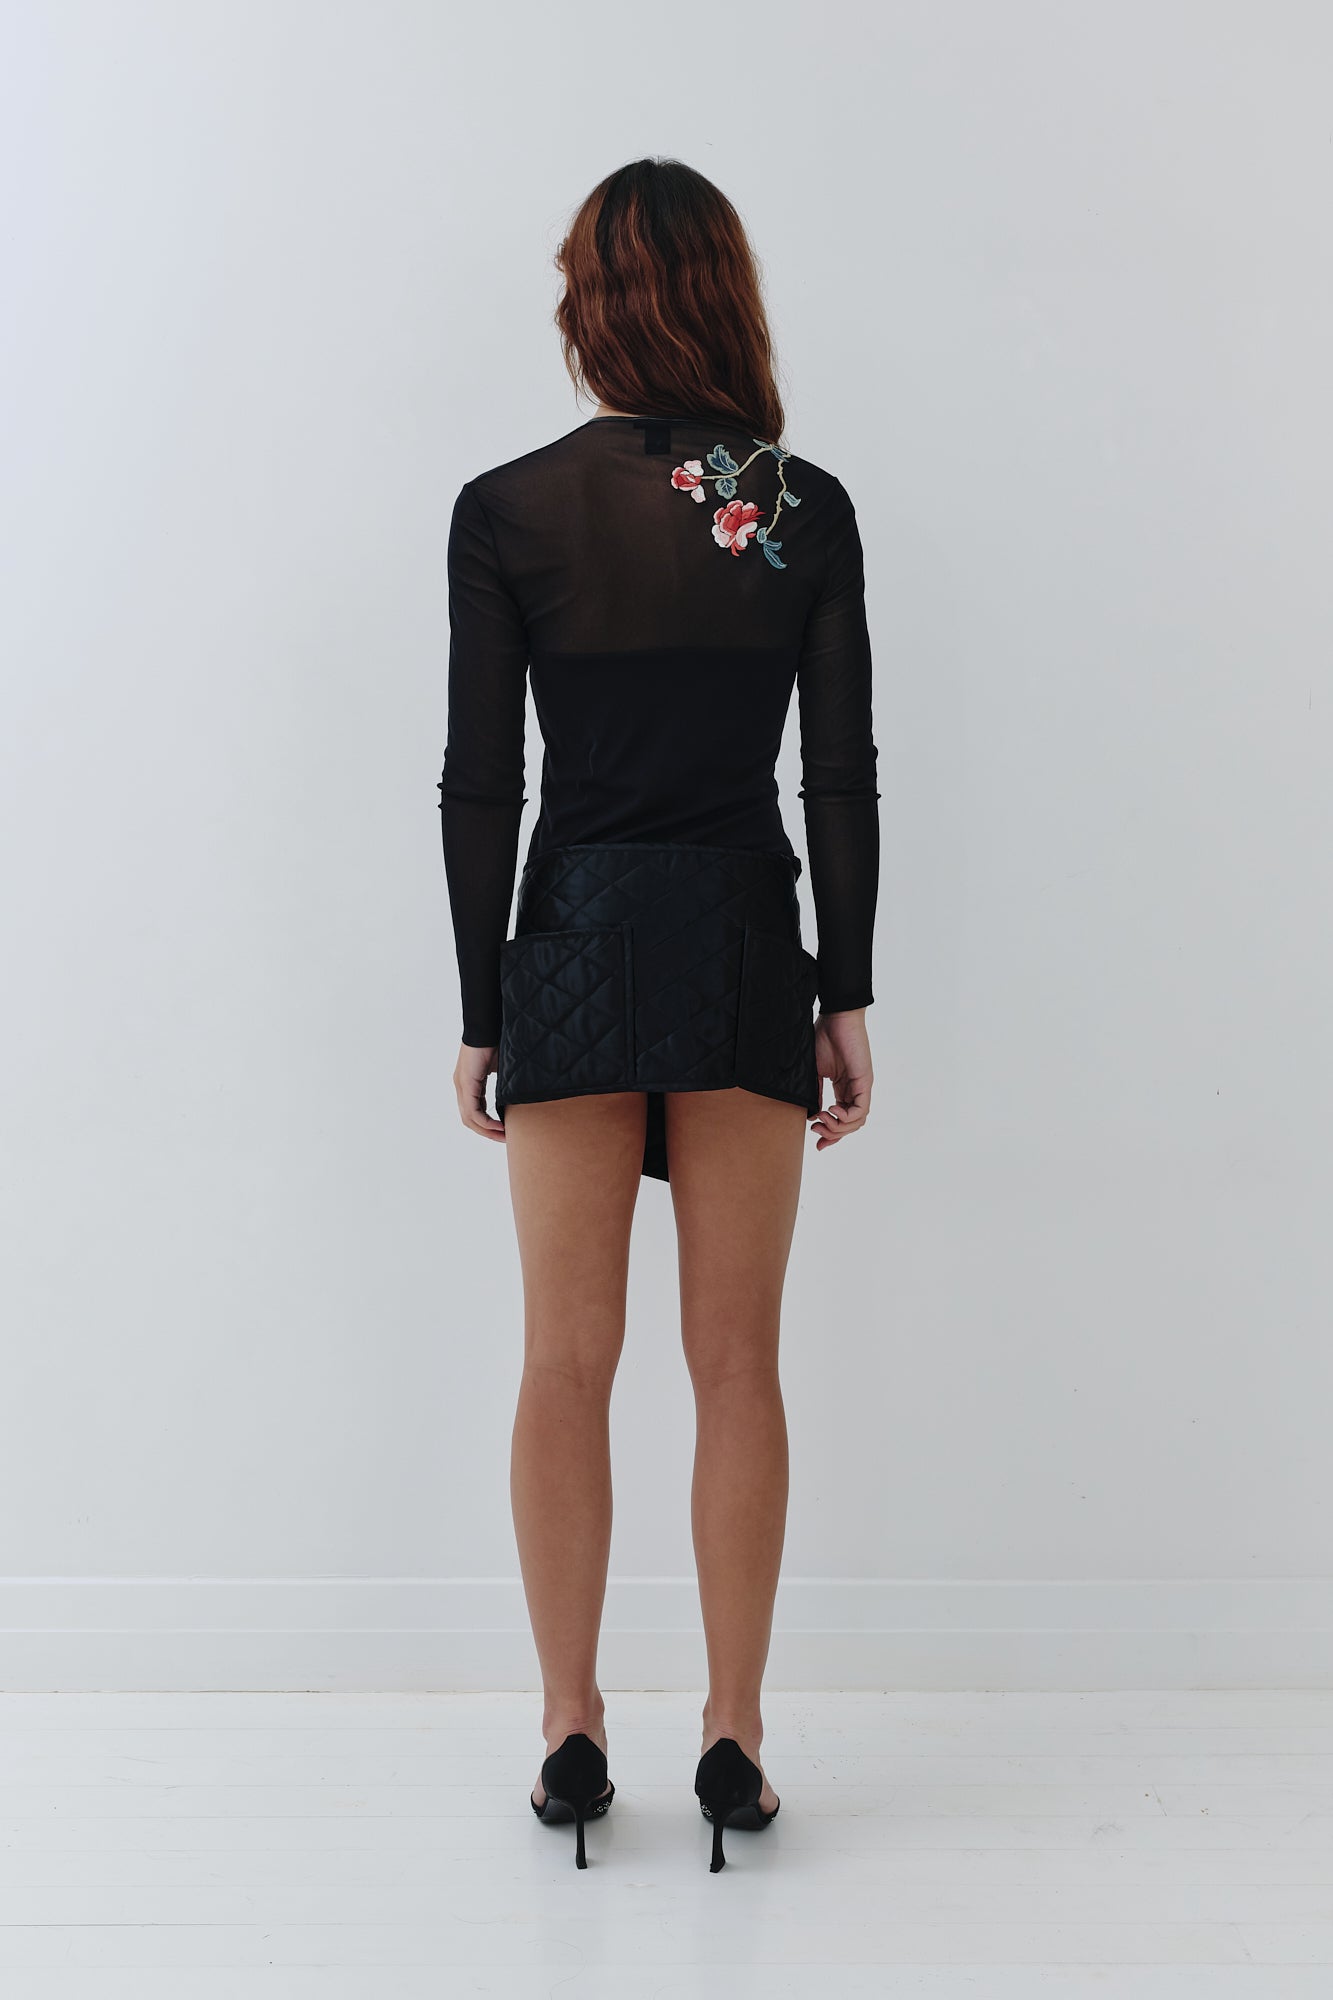 Vivienne Tam <br> 90's mesh embroidered cut-out top